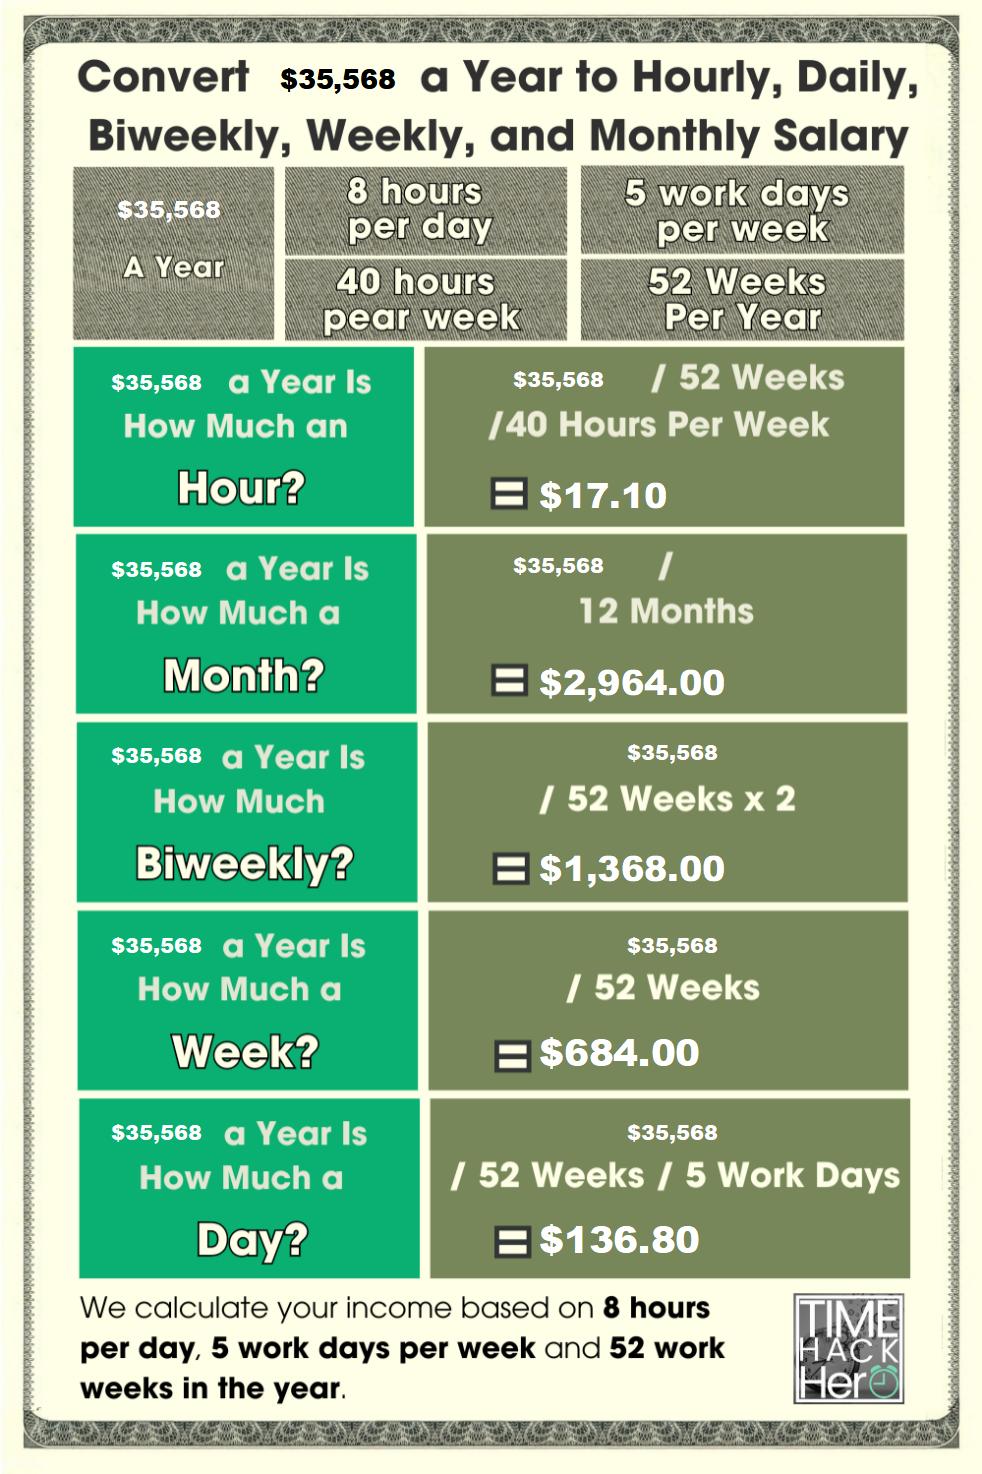 Convert $35568 a Year to Hourly, Daily, Biweekly, Weekly, and Monthly Salary